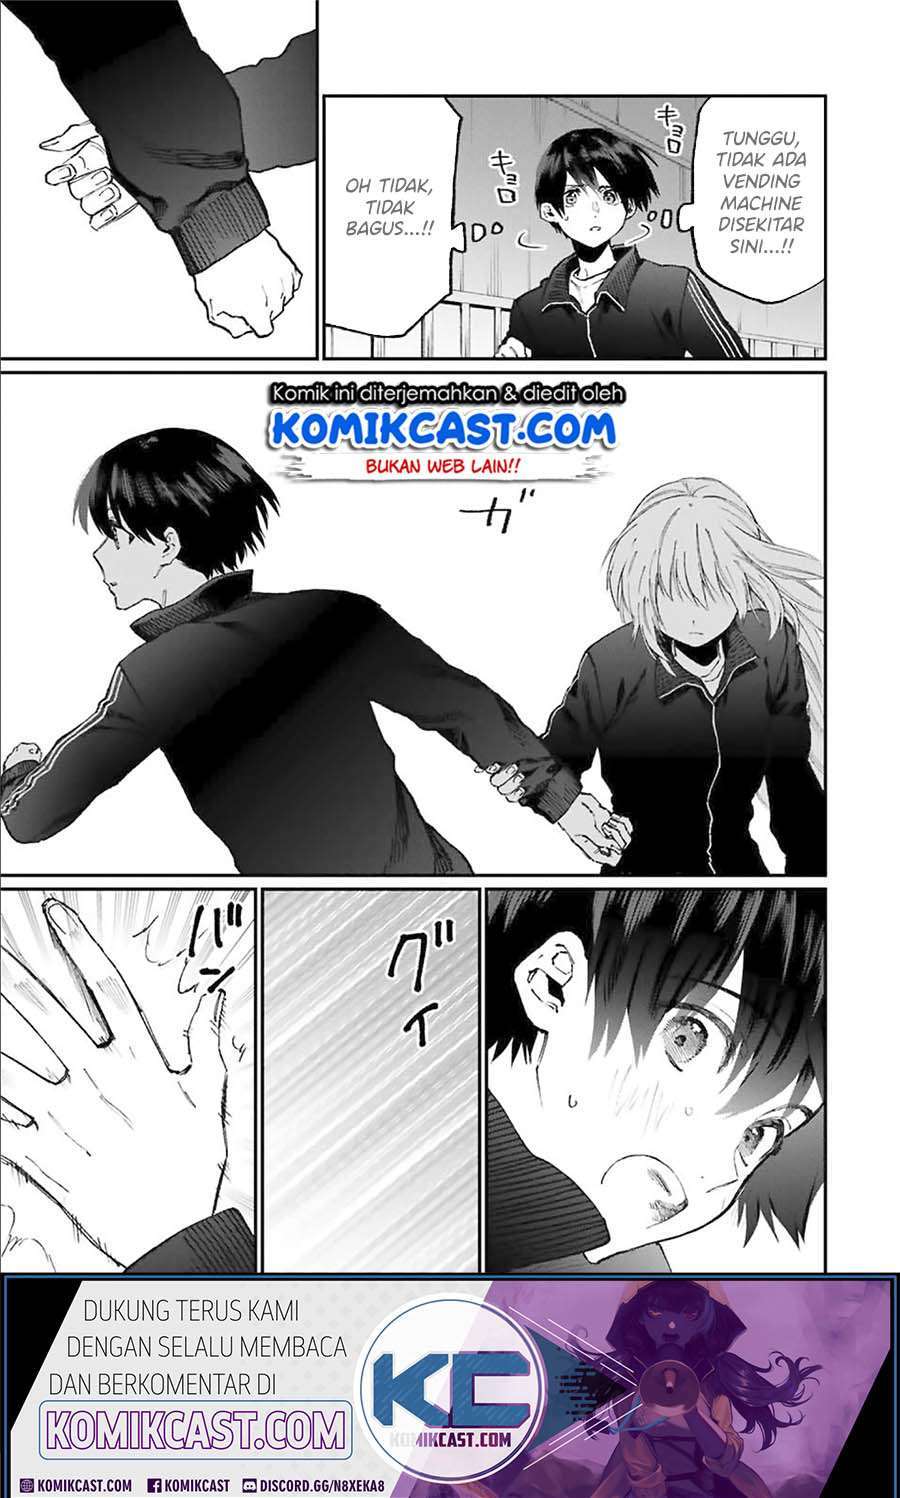 That Girl Is Not Just Cute Chapter 91 Bahasa Indonesia